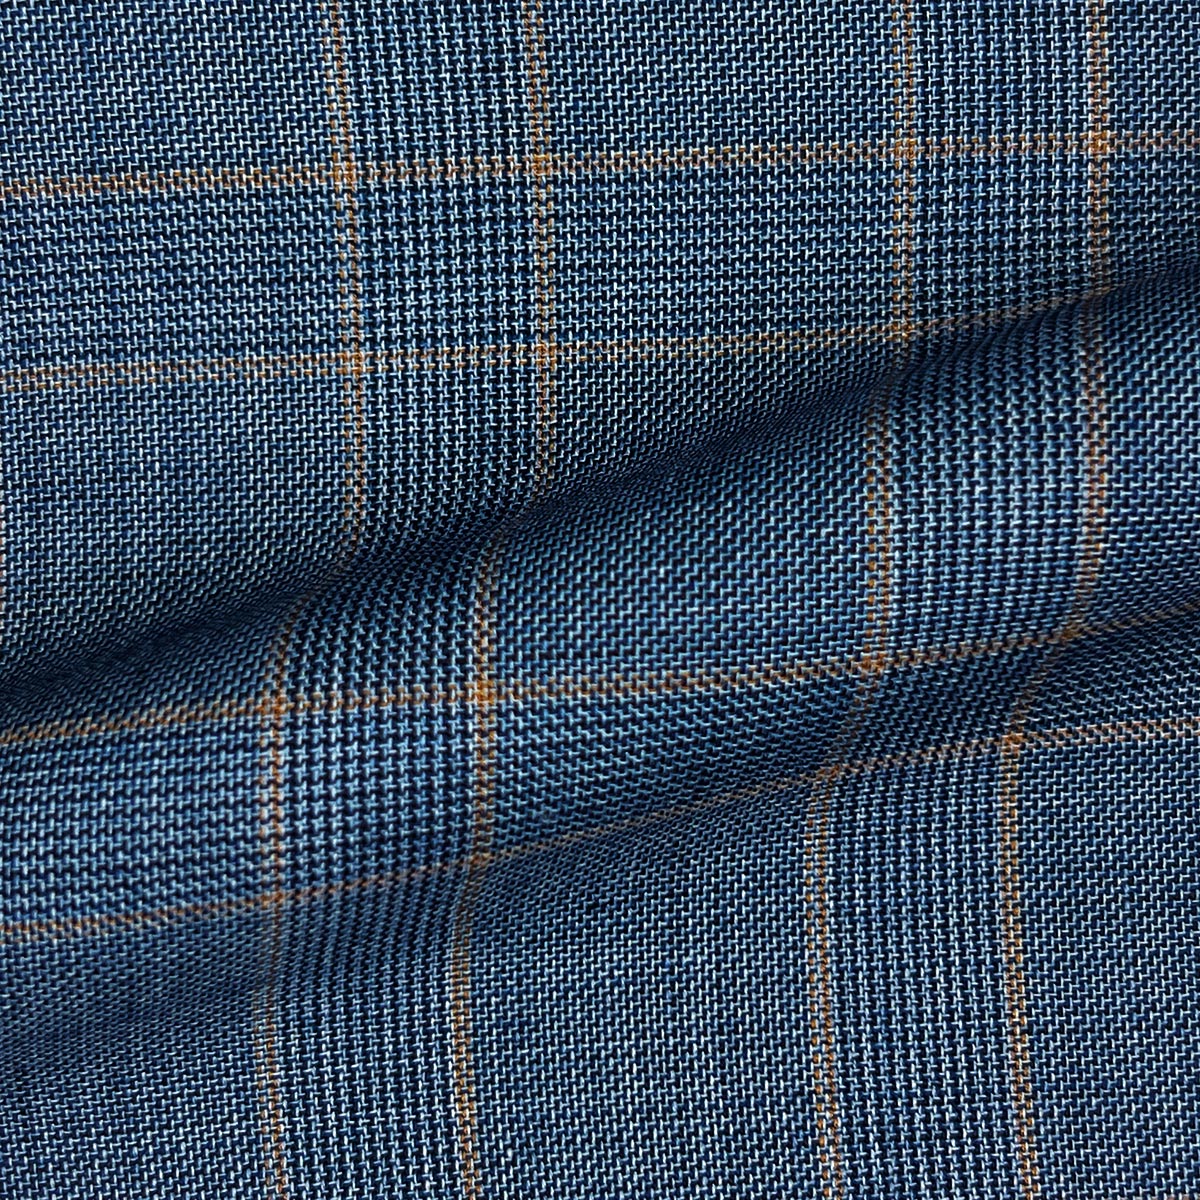 Option for a double-breasted style in stone blue and tan windowpane plaid.